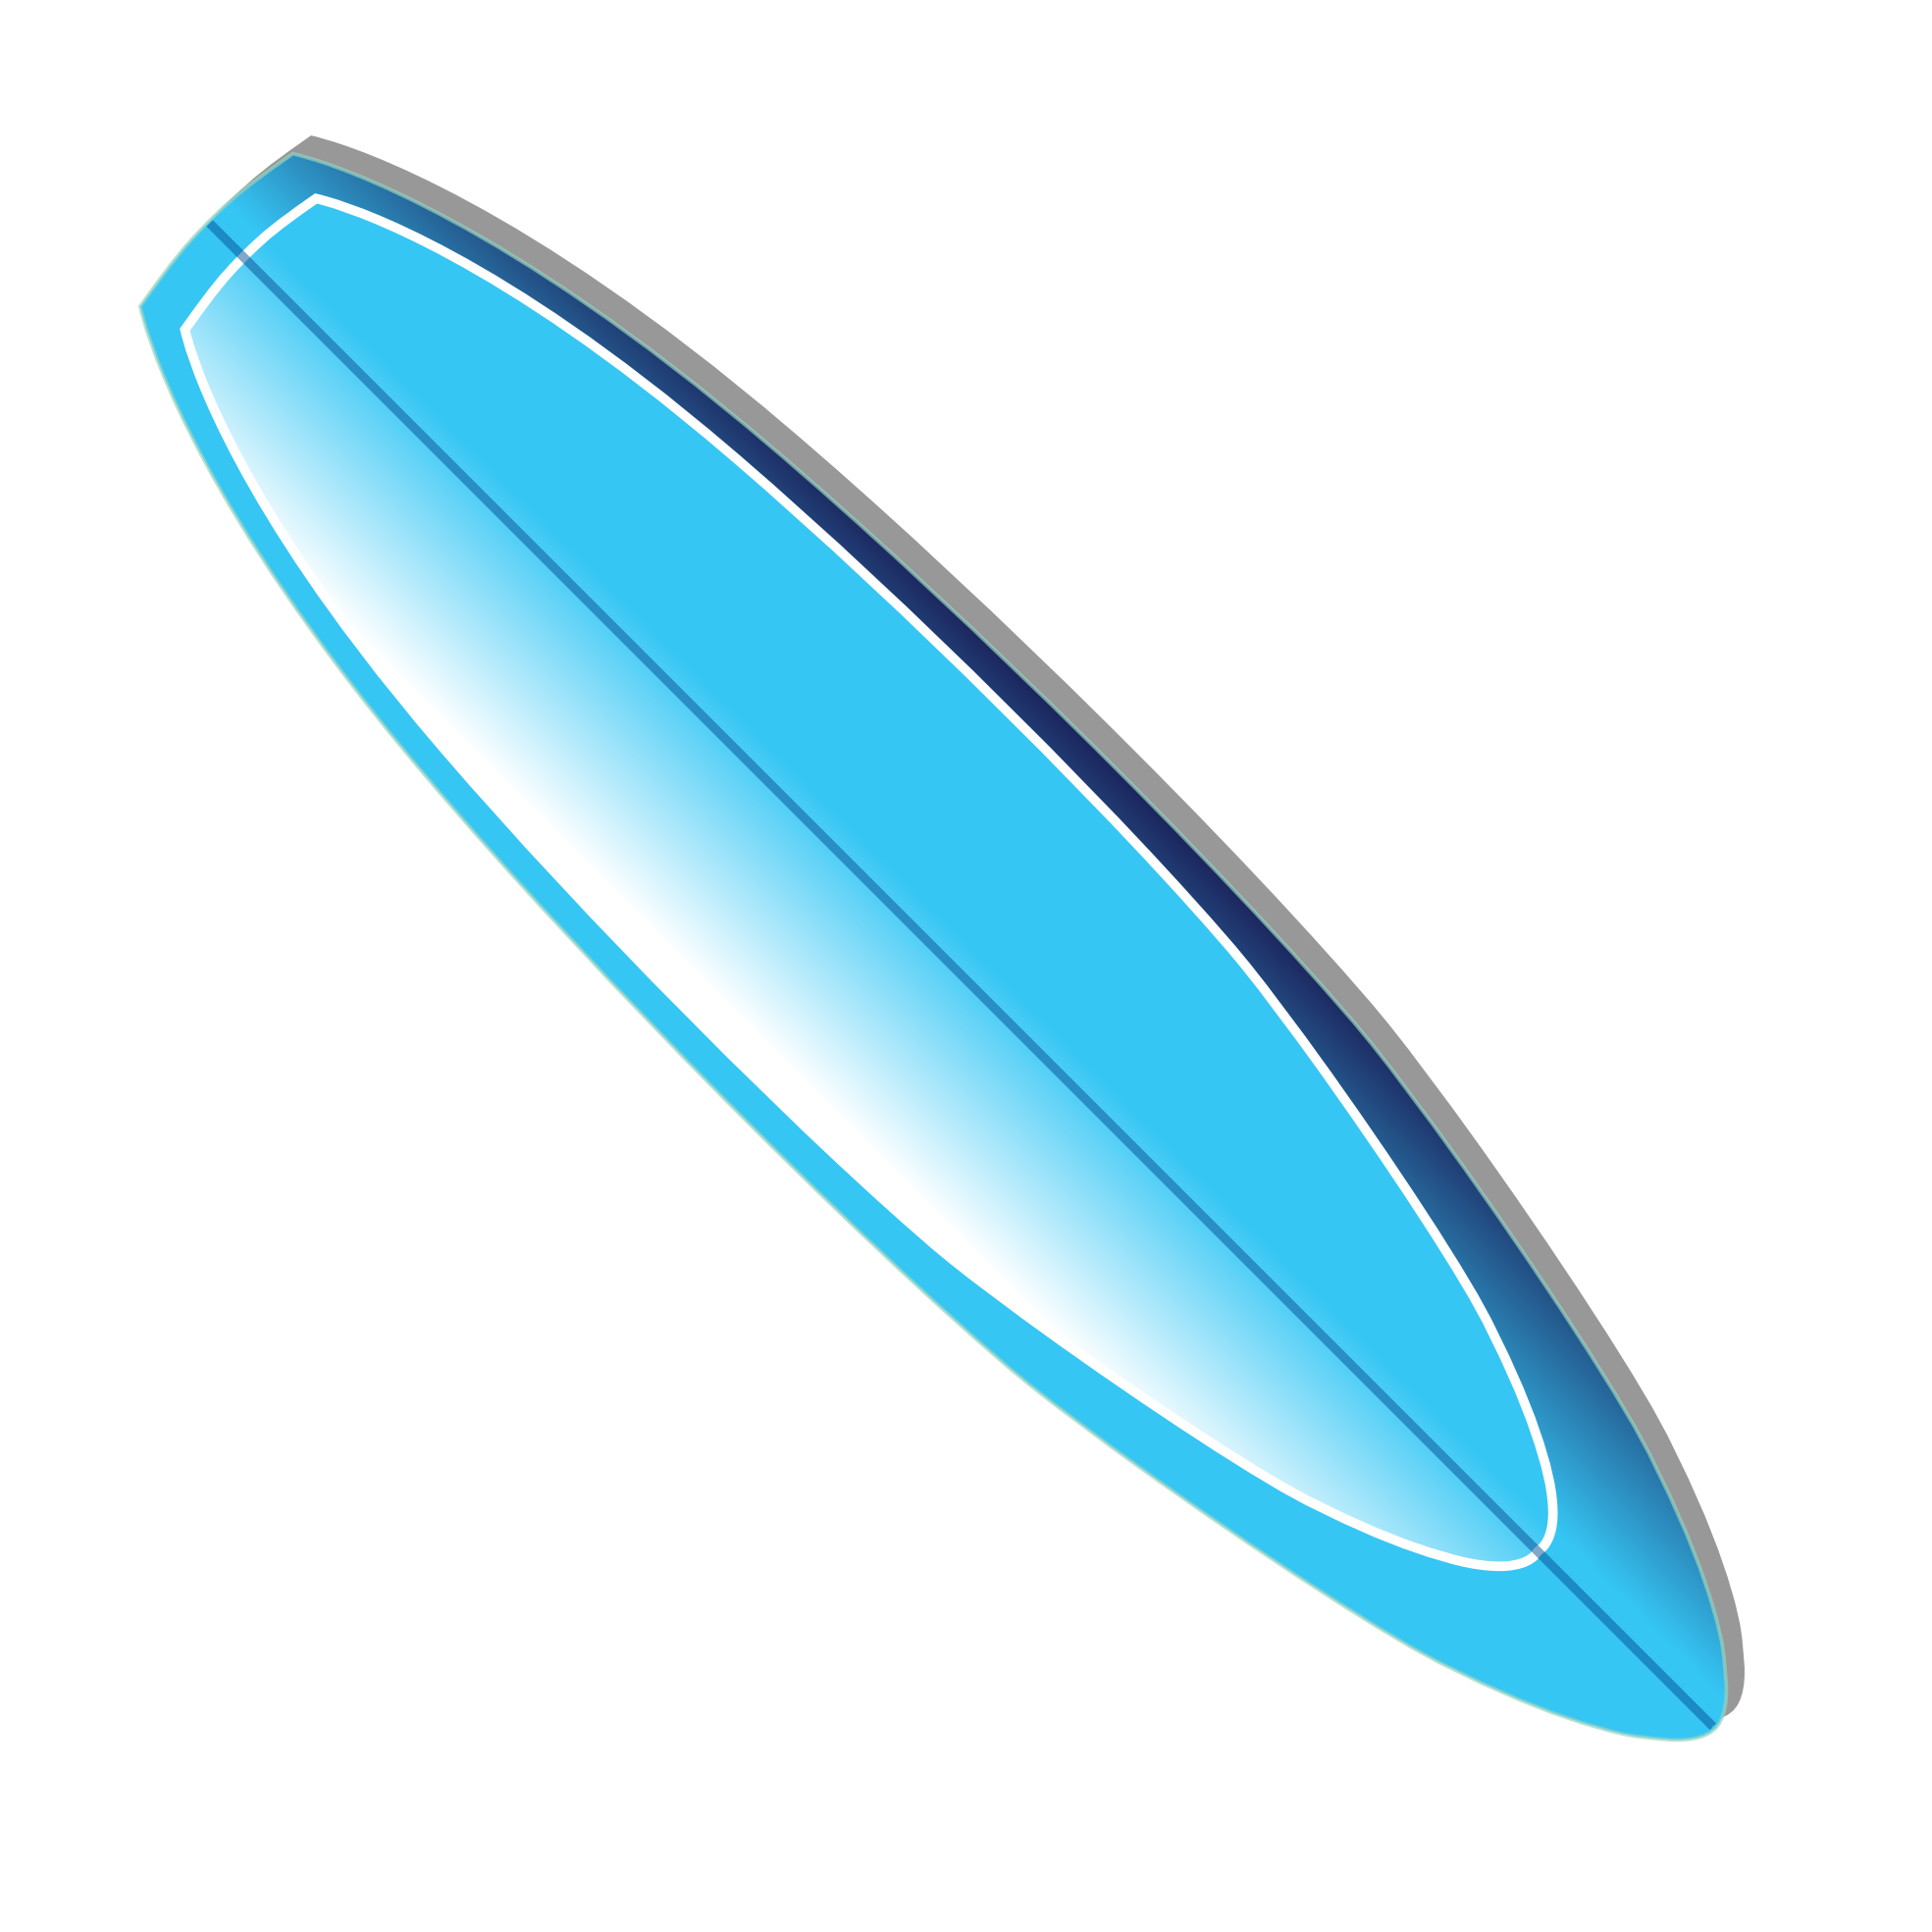 Flat surfboard icon png